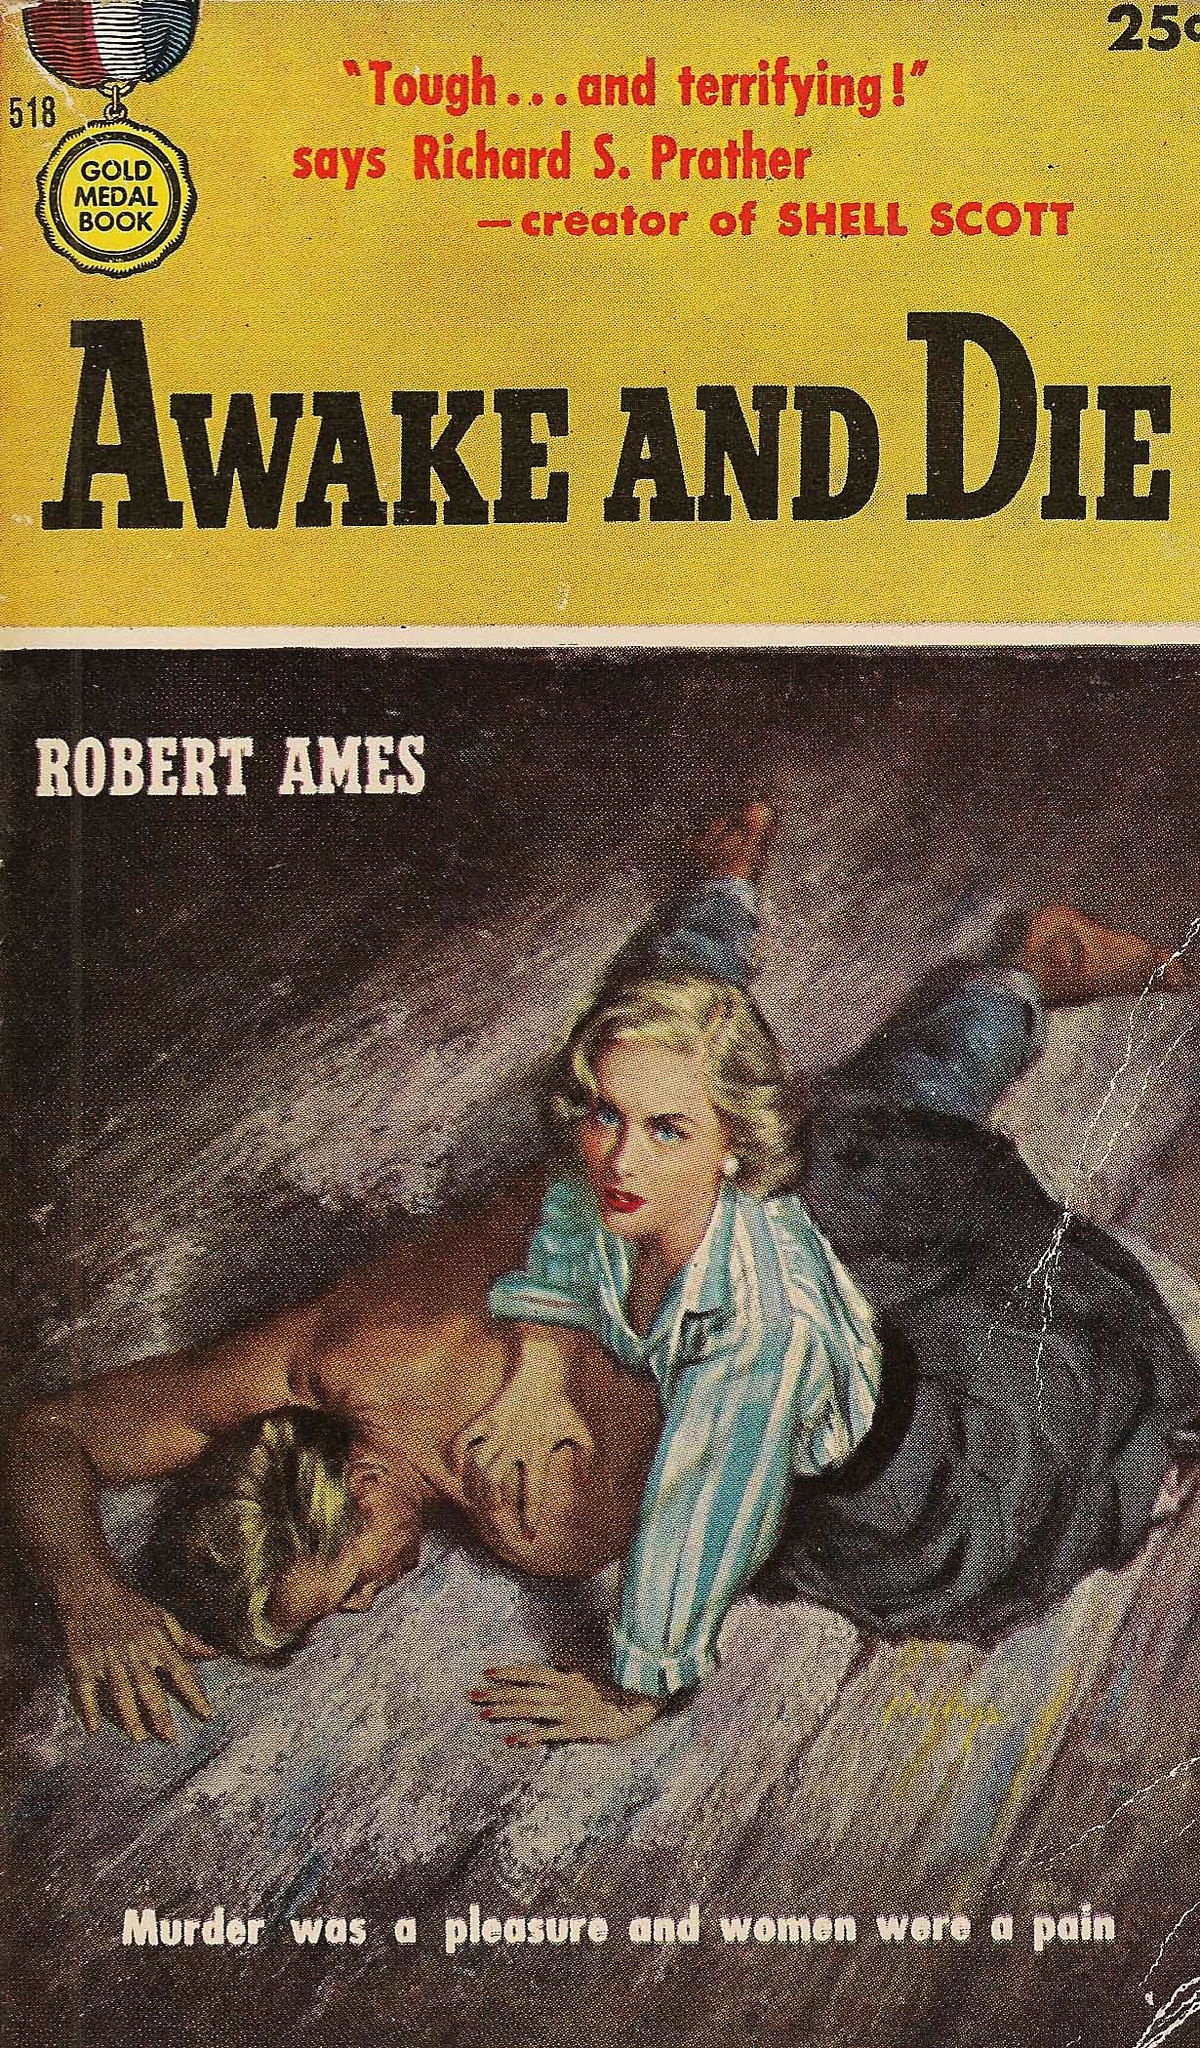 5297907857-gold-medal-books-518-robert-ames-awake-and-die